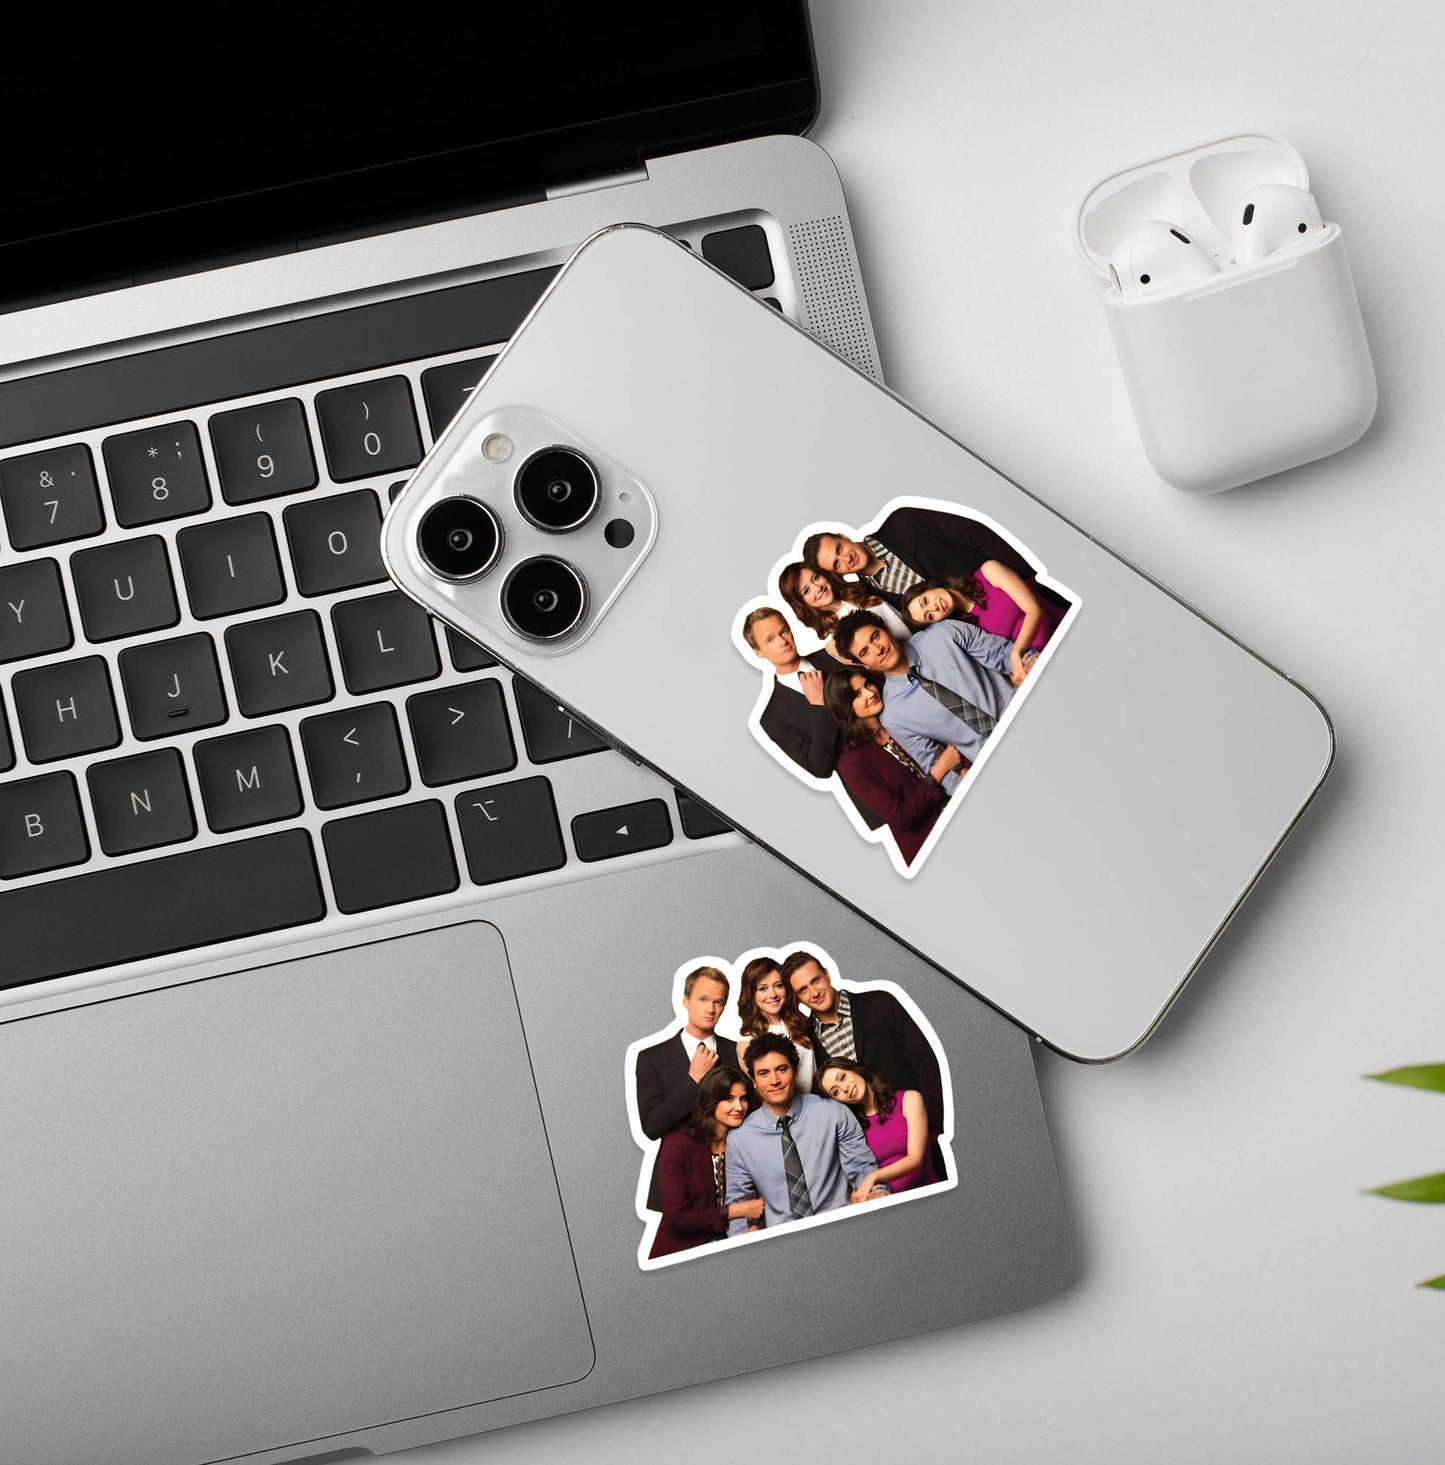 How I Met Your Mother - Laptop / Mobile Sticker